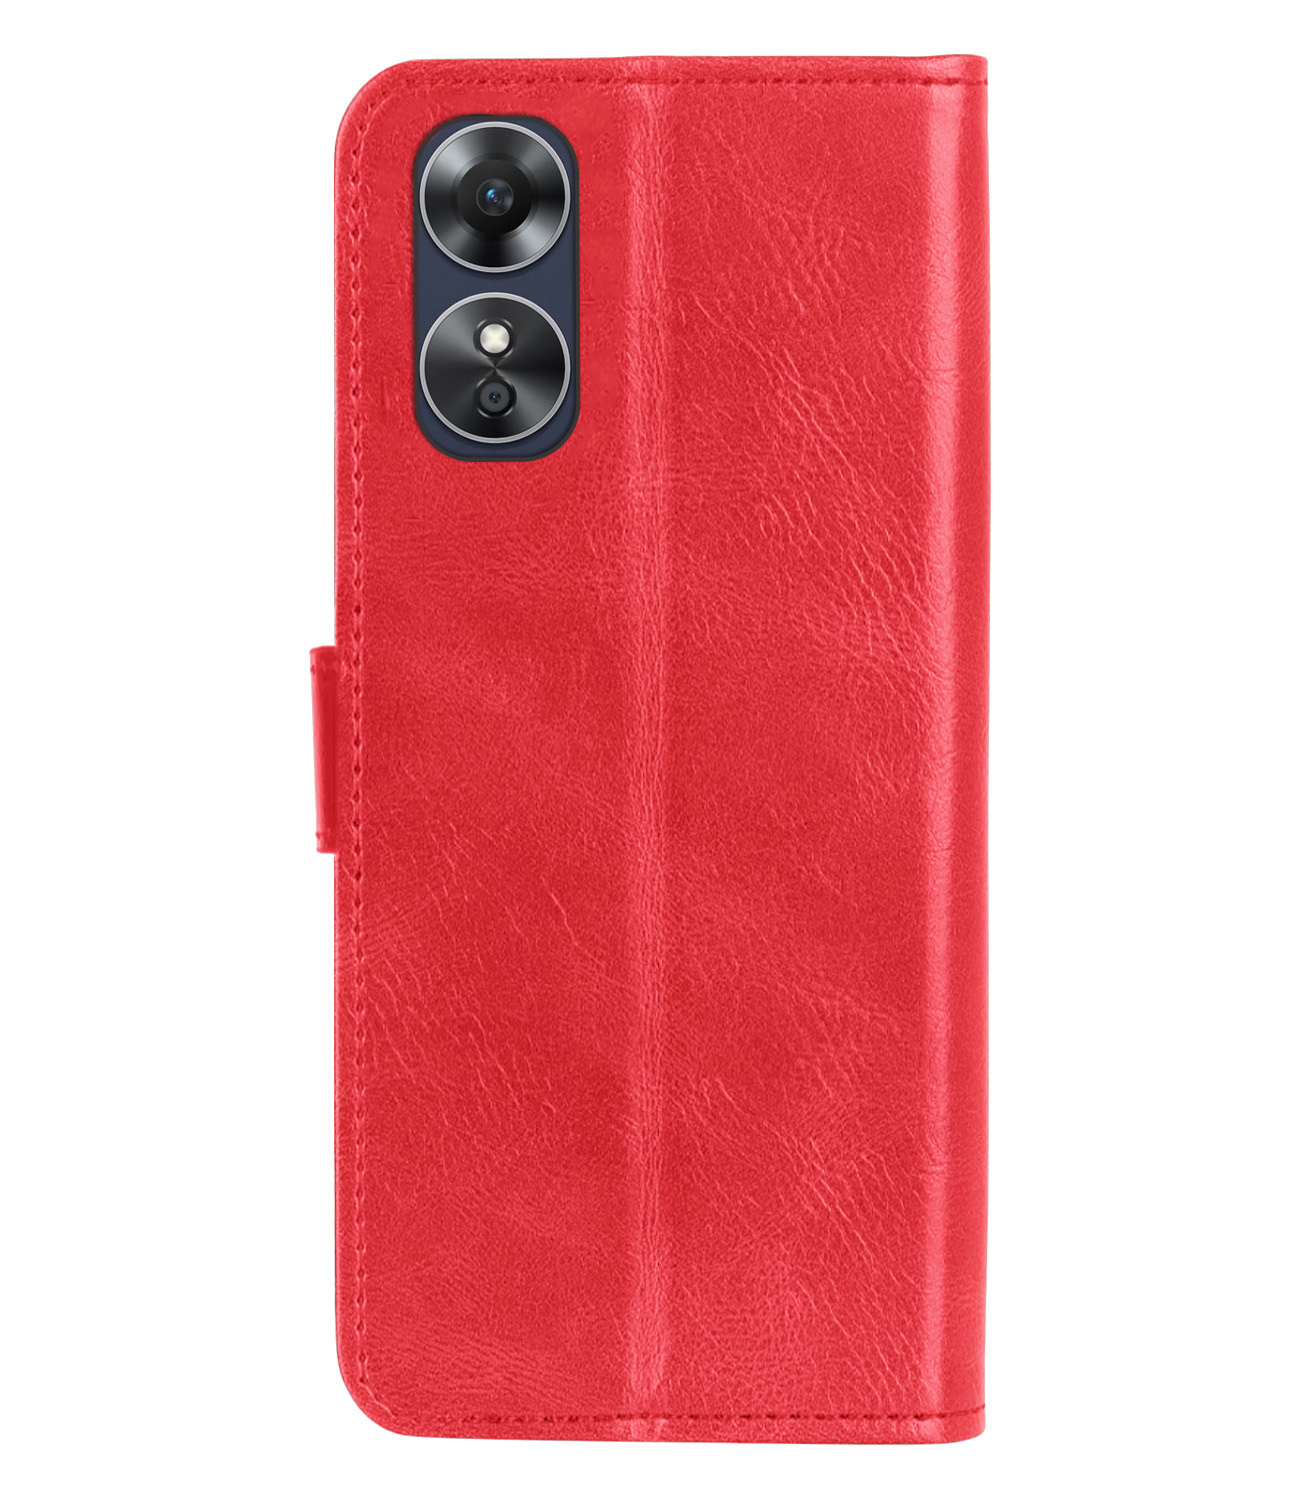 Nomfy OPPO A17 Hoes Bookcase Flipcase Book Cover Met Screenprotector - OPPO A17 Hoesje Book Case - Rood